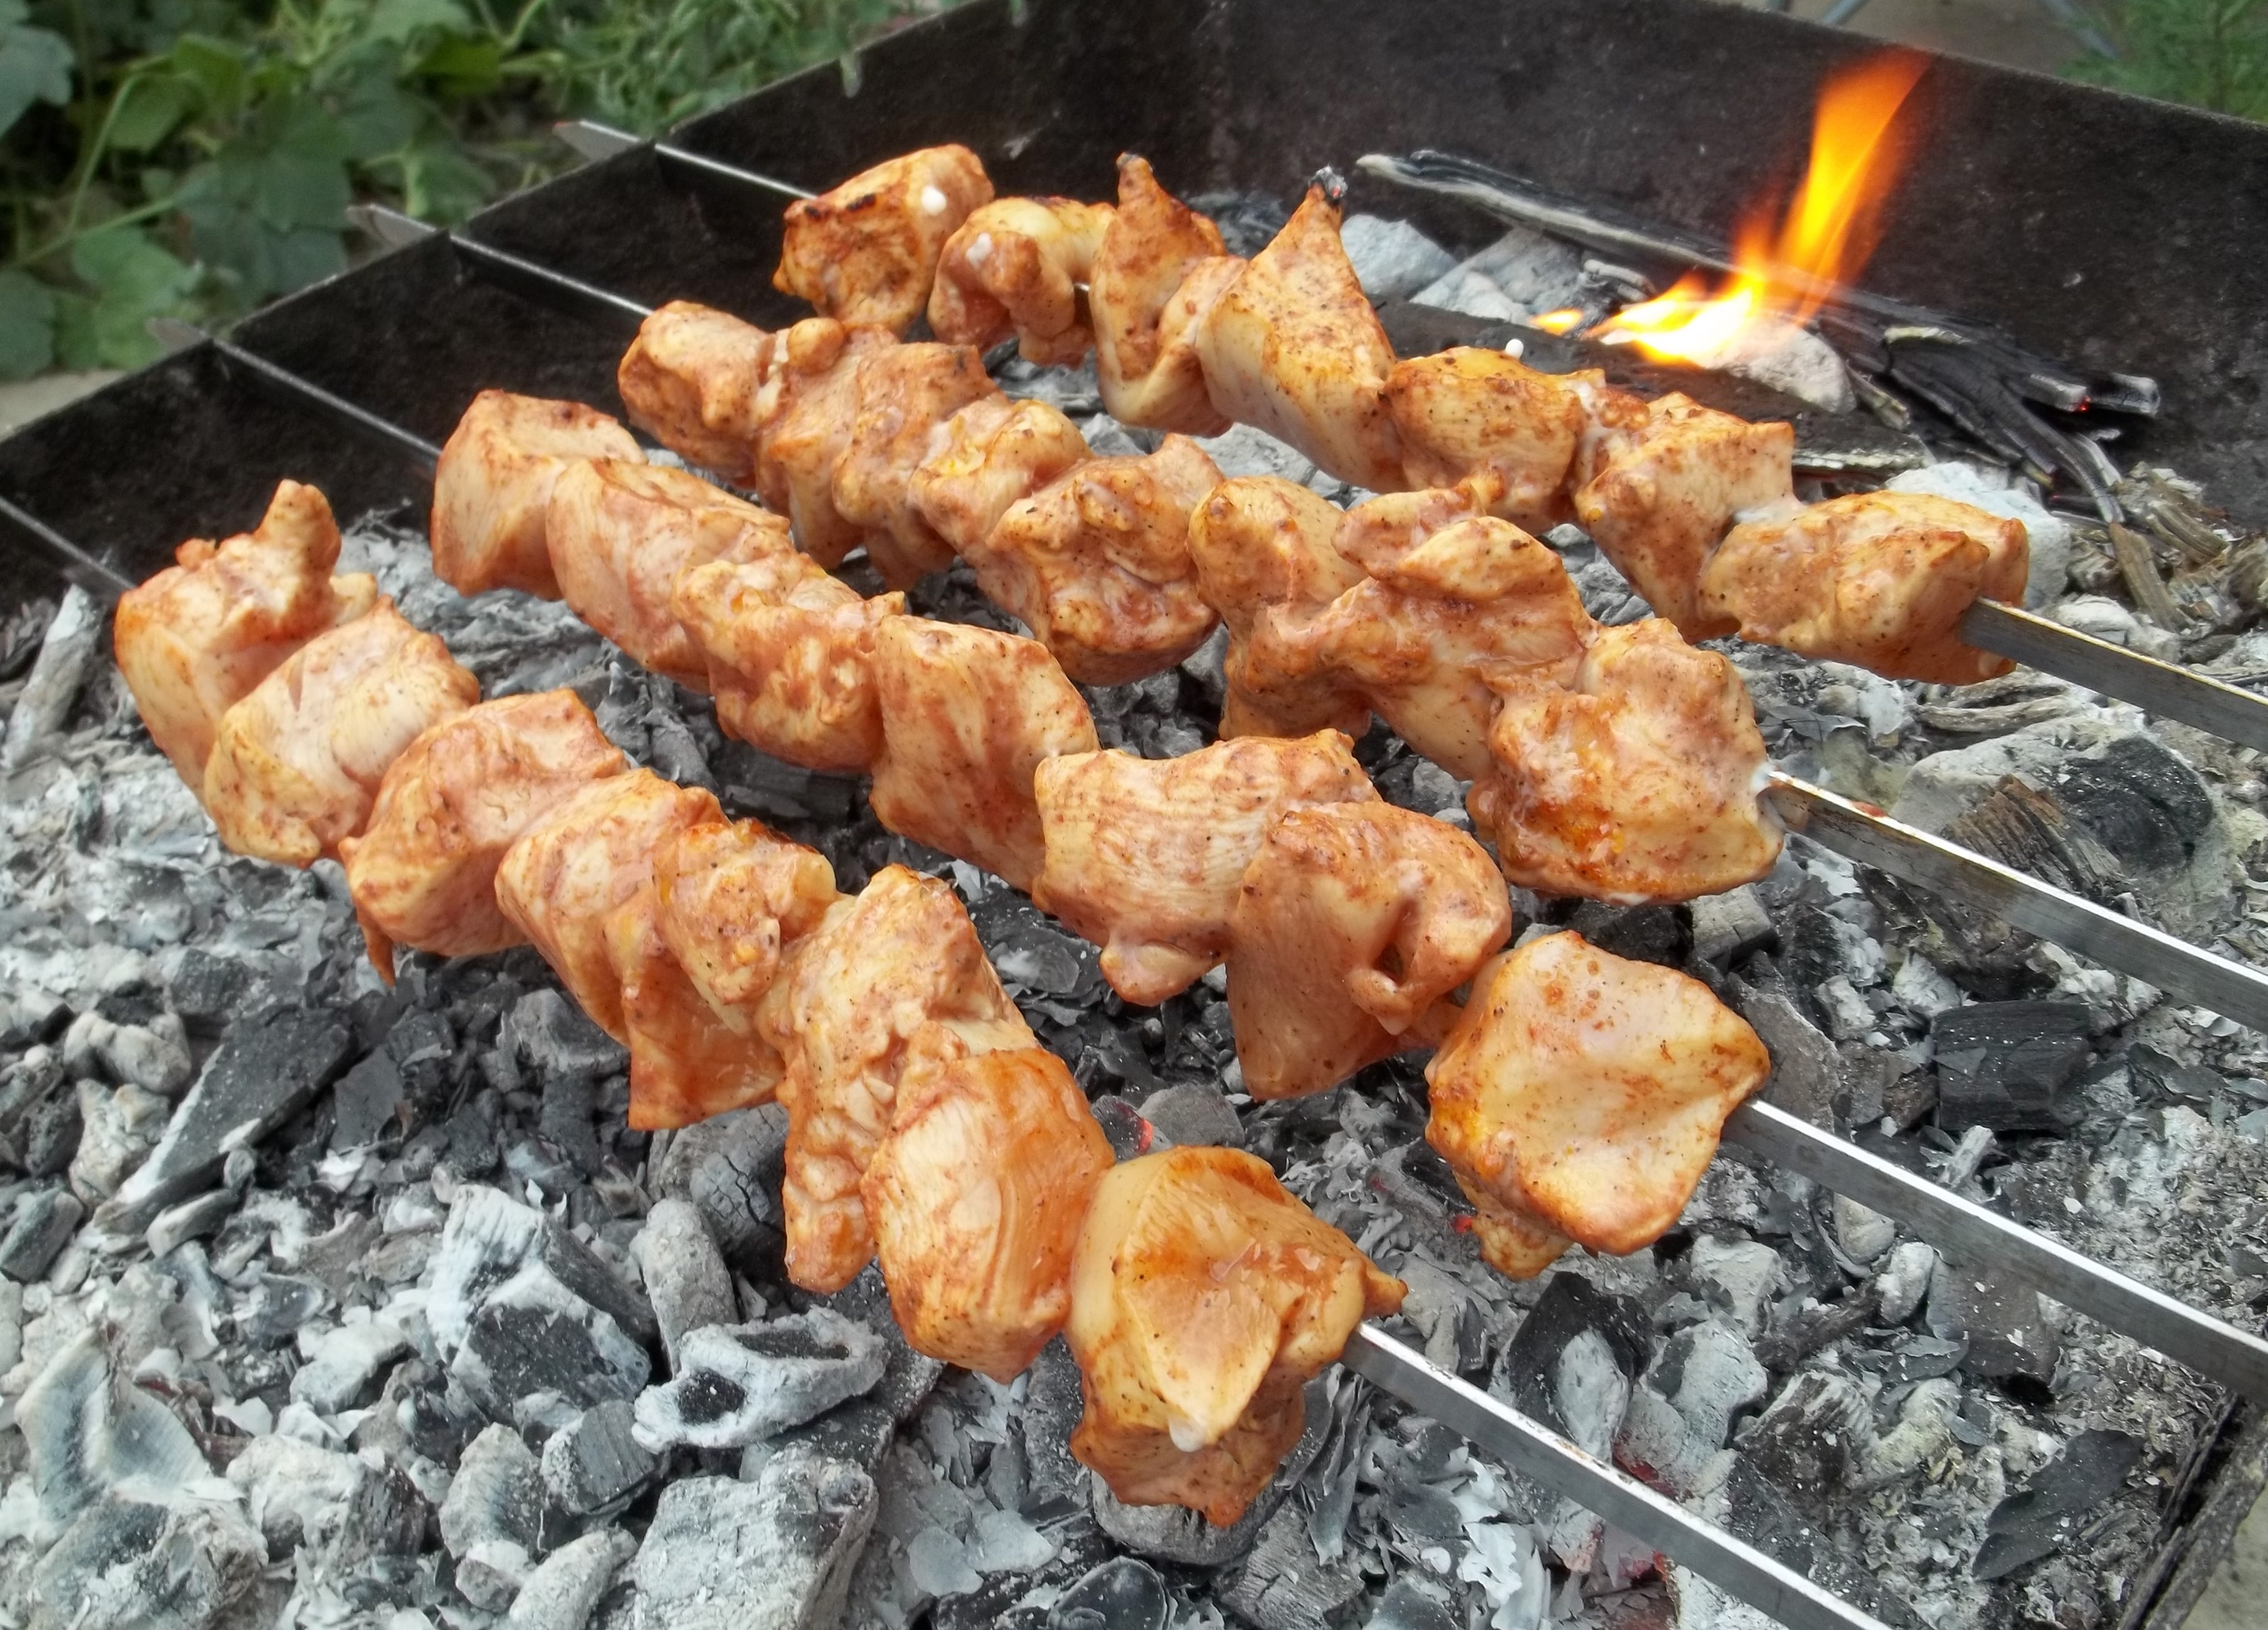 About Food – Chicken Barbecue | Georgia About